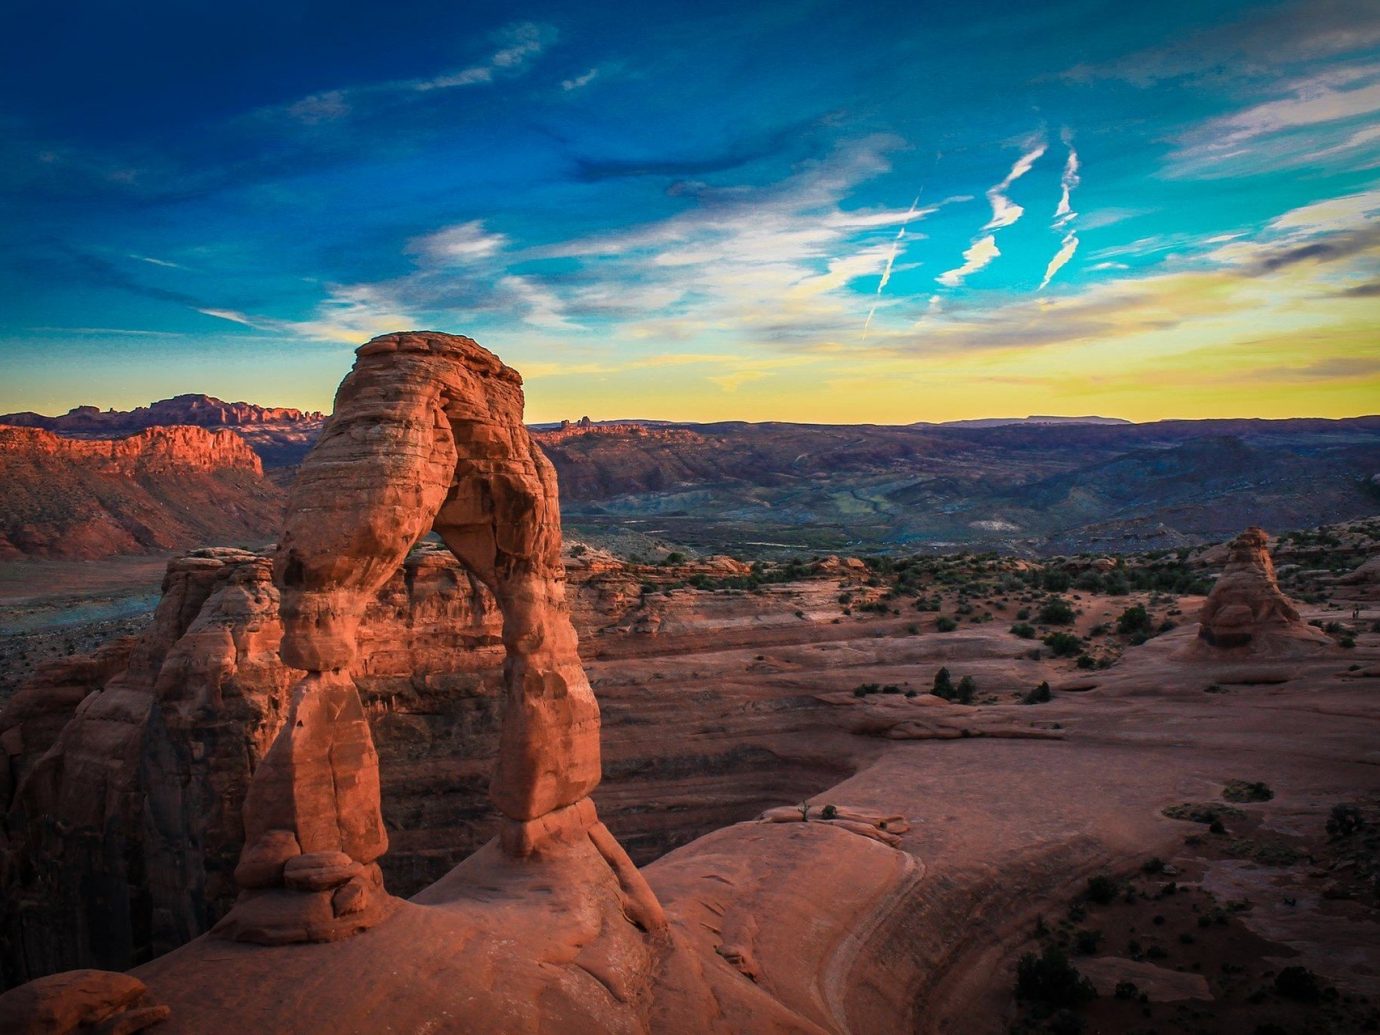 calm canyon colorful Desert Hotels isolation red rock remote rock Rocks Scenic views serene Sunset Trip Ideas Weekend Getaways sky Nature valley outdoor mountain geographical feature landform natural environment badlands butte sunrise landscape wadi arch plateau formation geology dusk terrain material